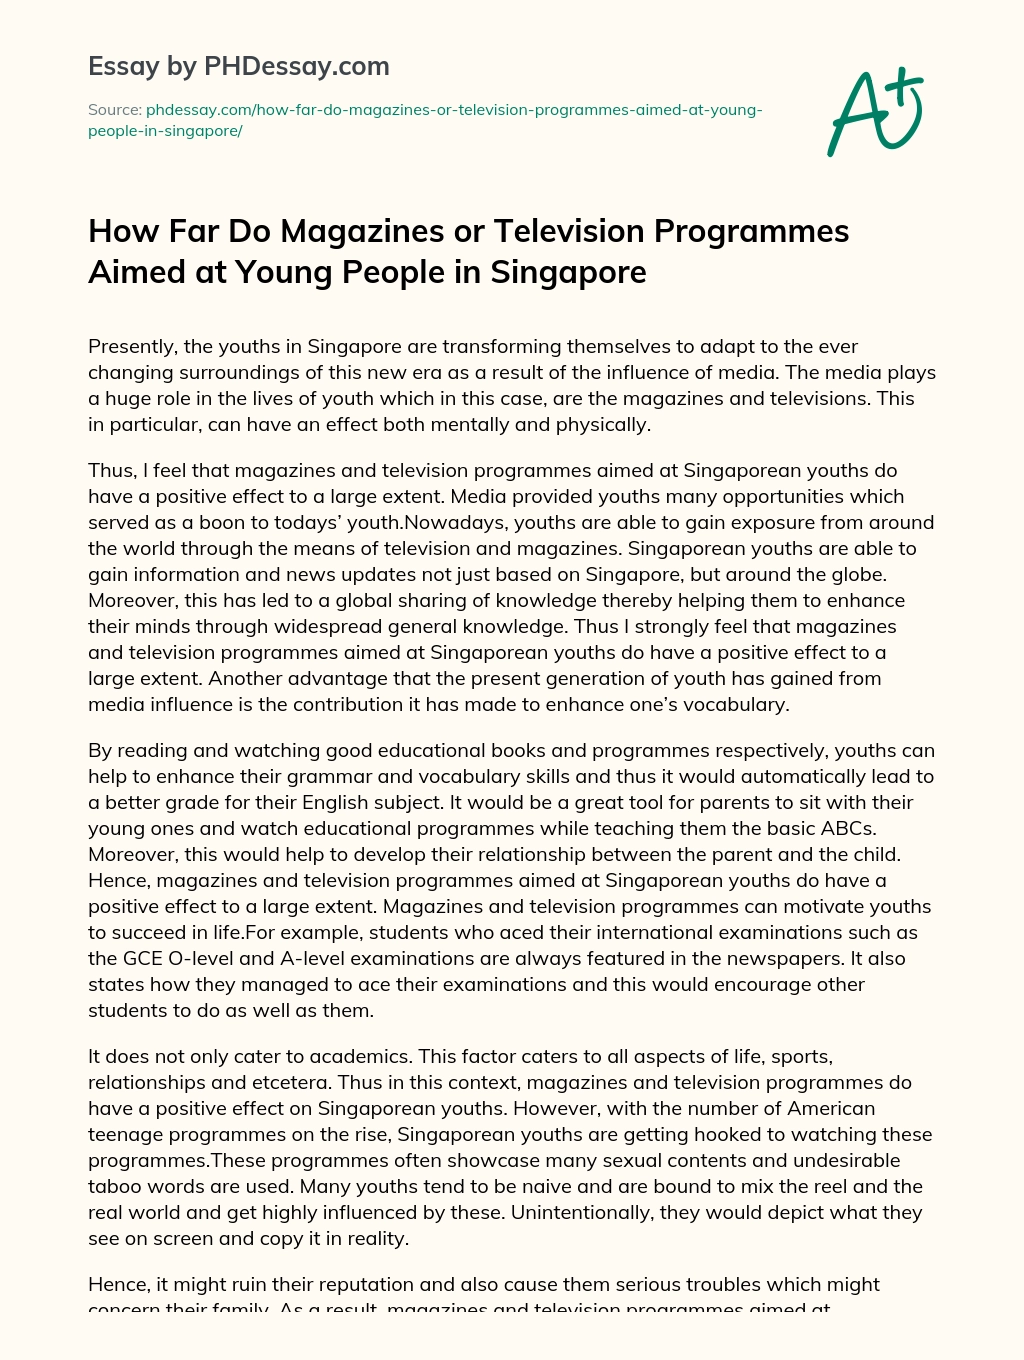 How Far Do Magazines or Television Programmes Aimed at Young People in Singapore essay